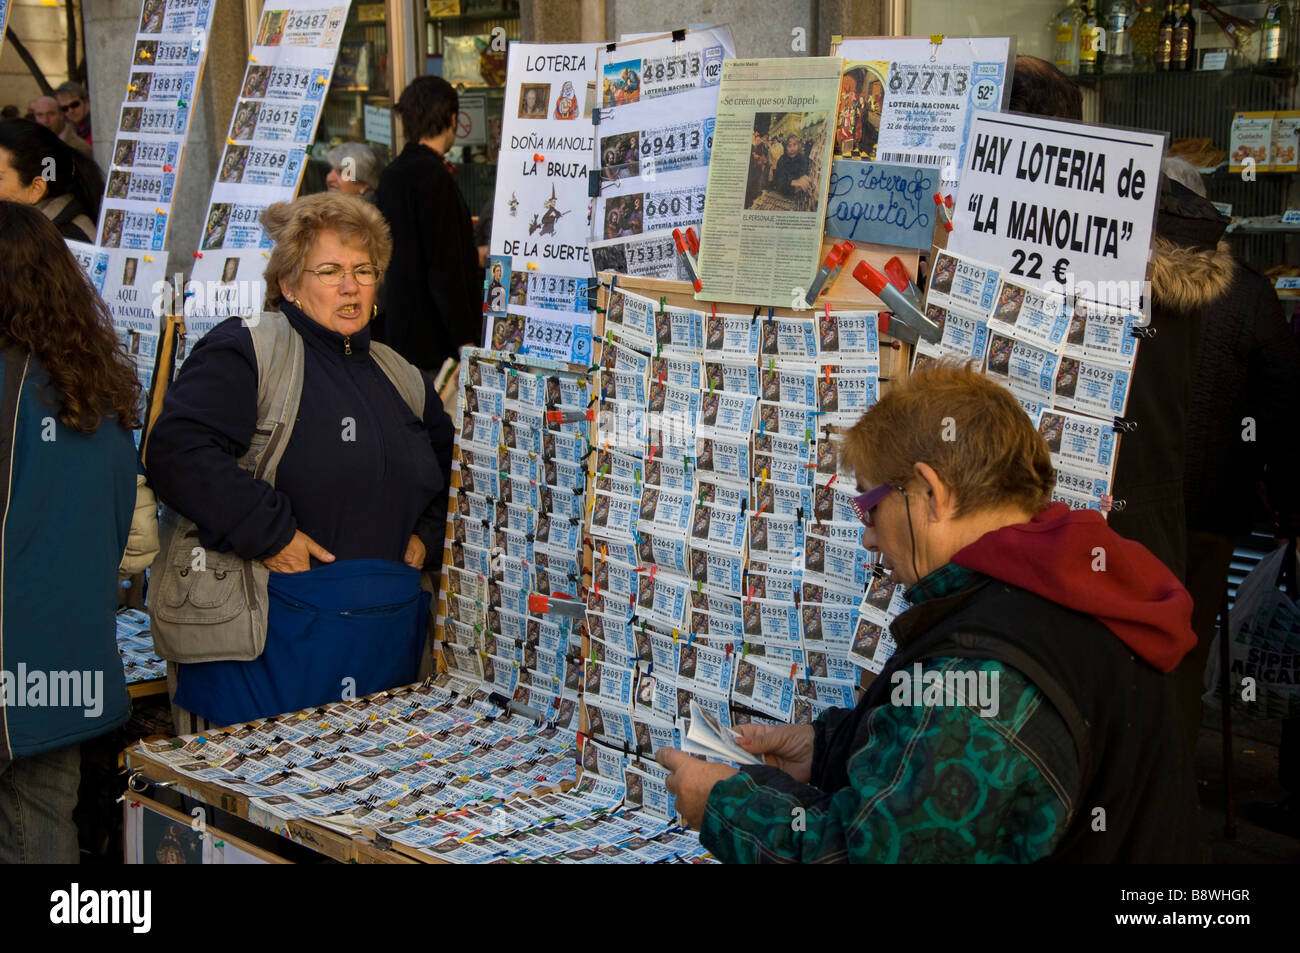 Selling lottery tickets in Puerta del Sol Madrid Spain Stock Photo